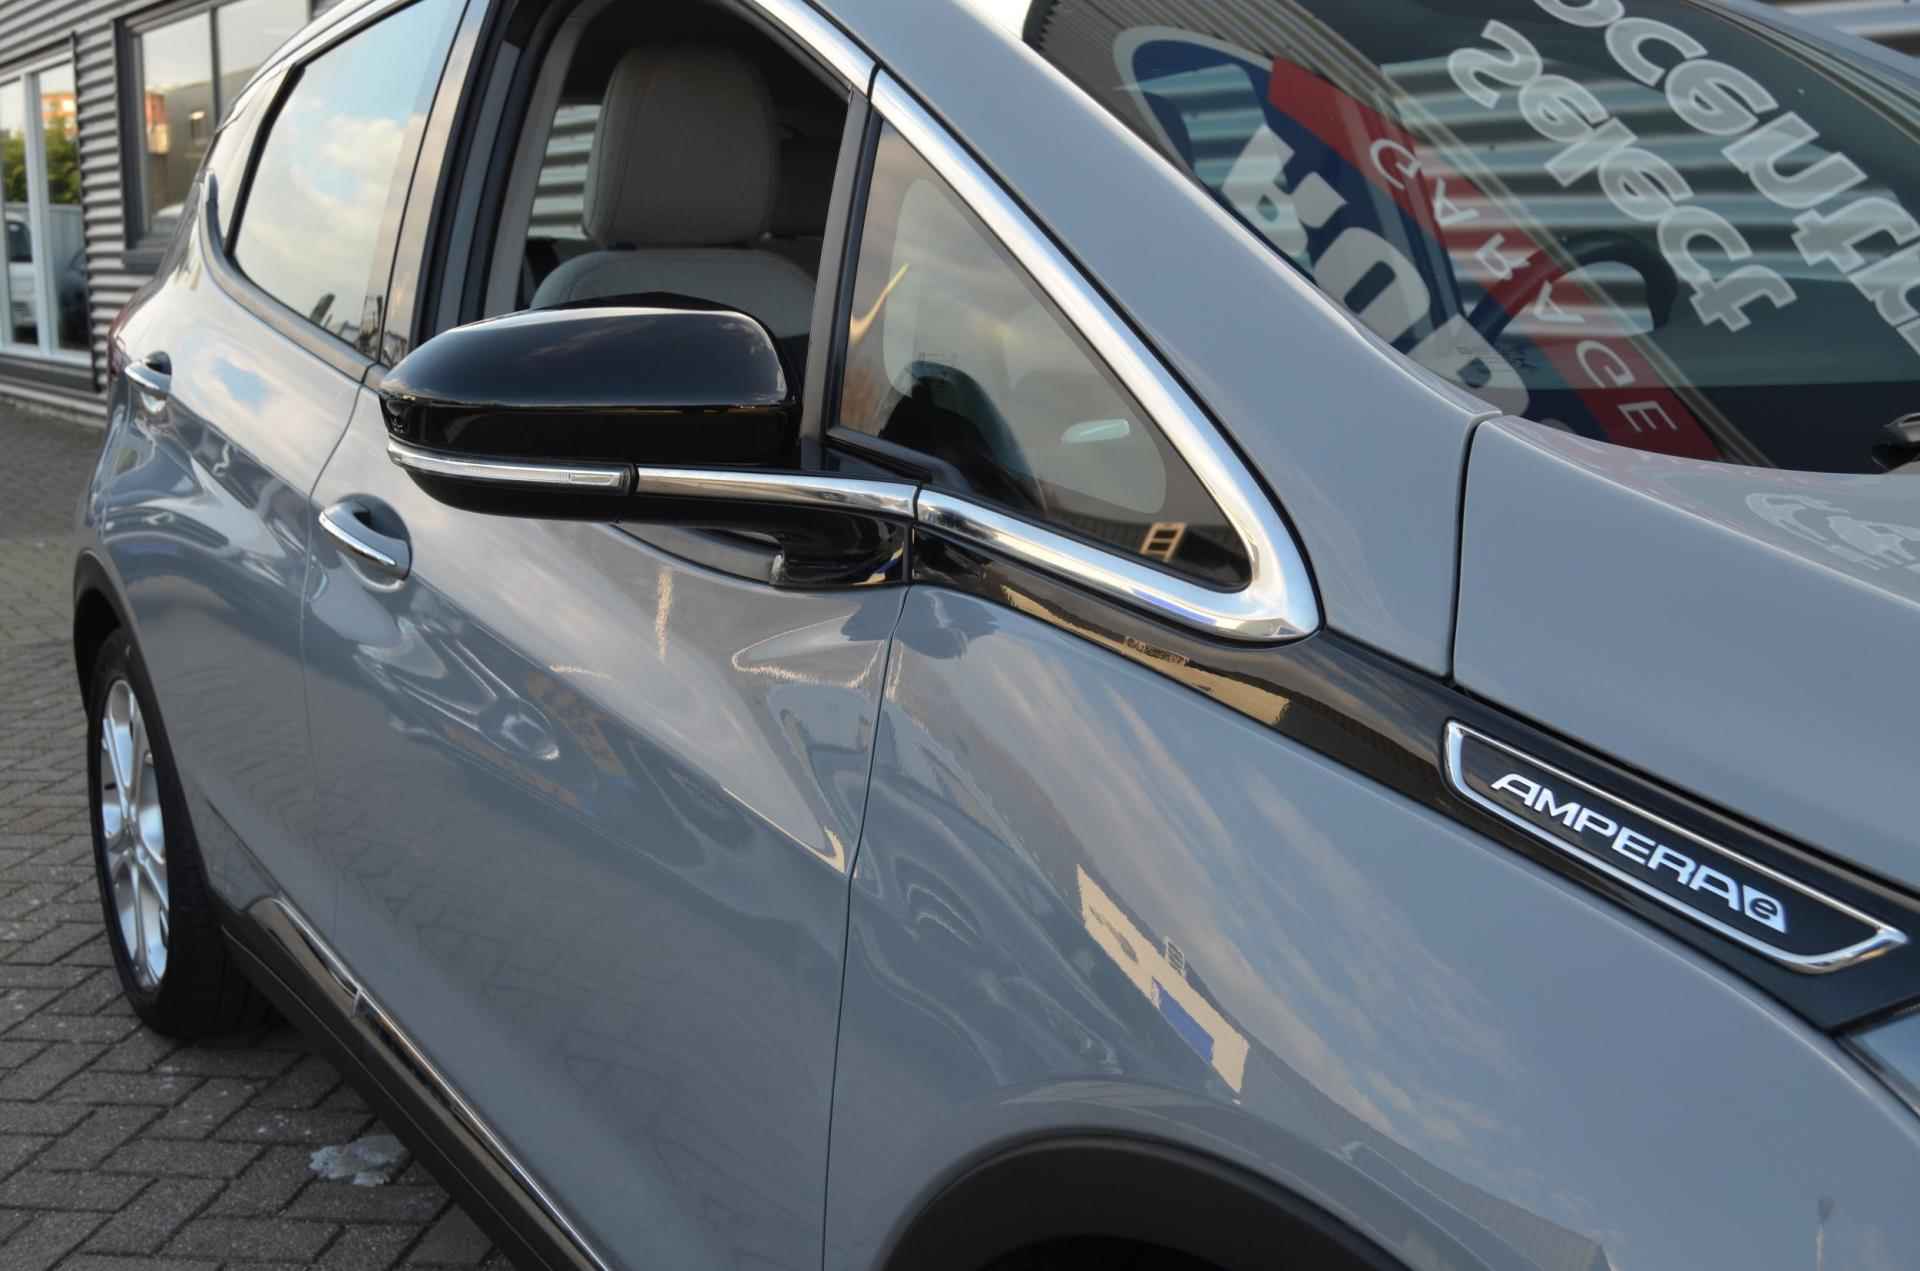 Opel Ampera-e Business executive 60 kWh|LED|AUTOMAAT|PDC V+A|STUUR +STOELVERW.|CARPLAY|CRUISE|CLIMA|NAP - 15/41